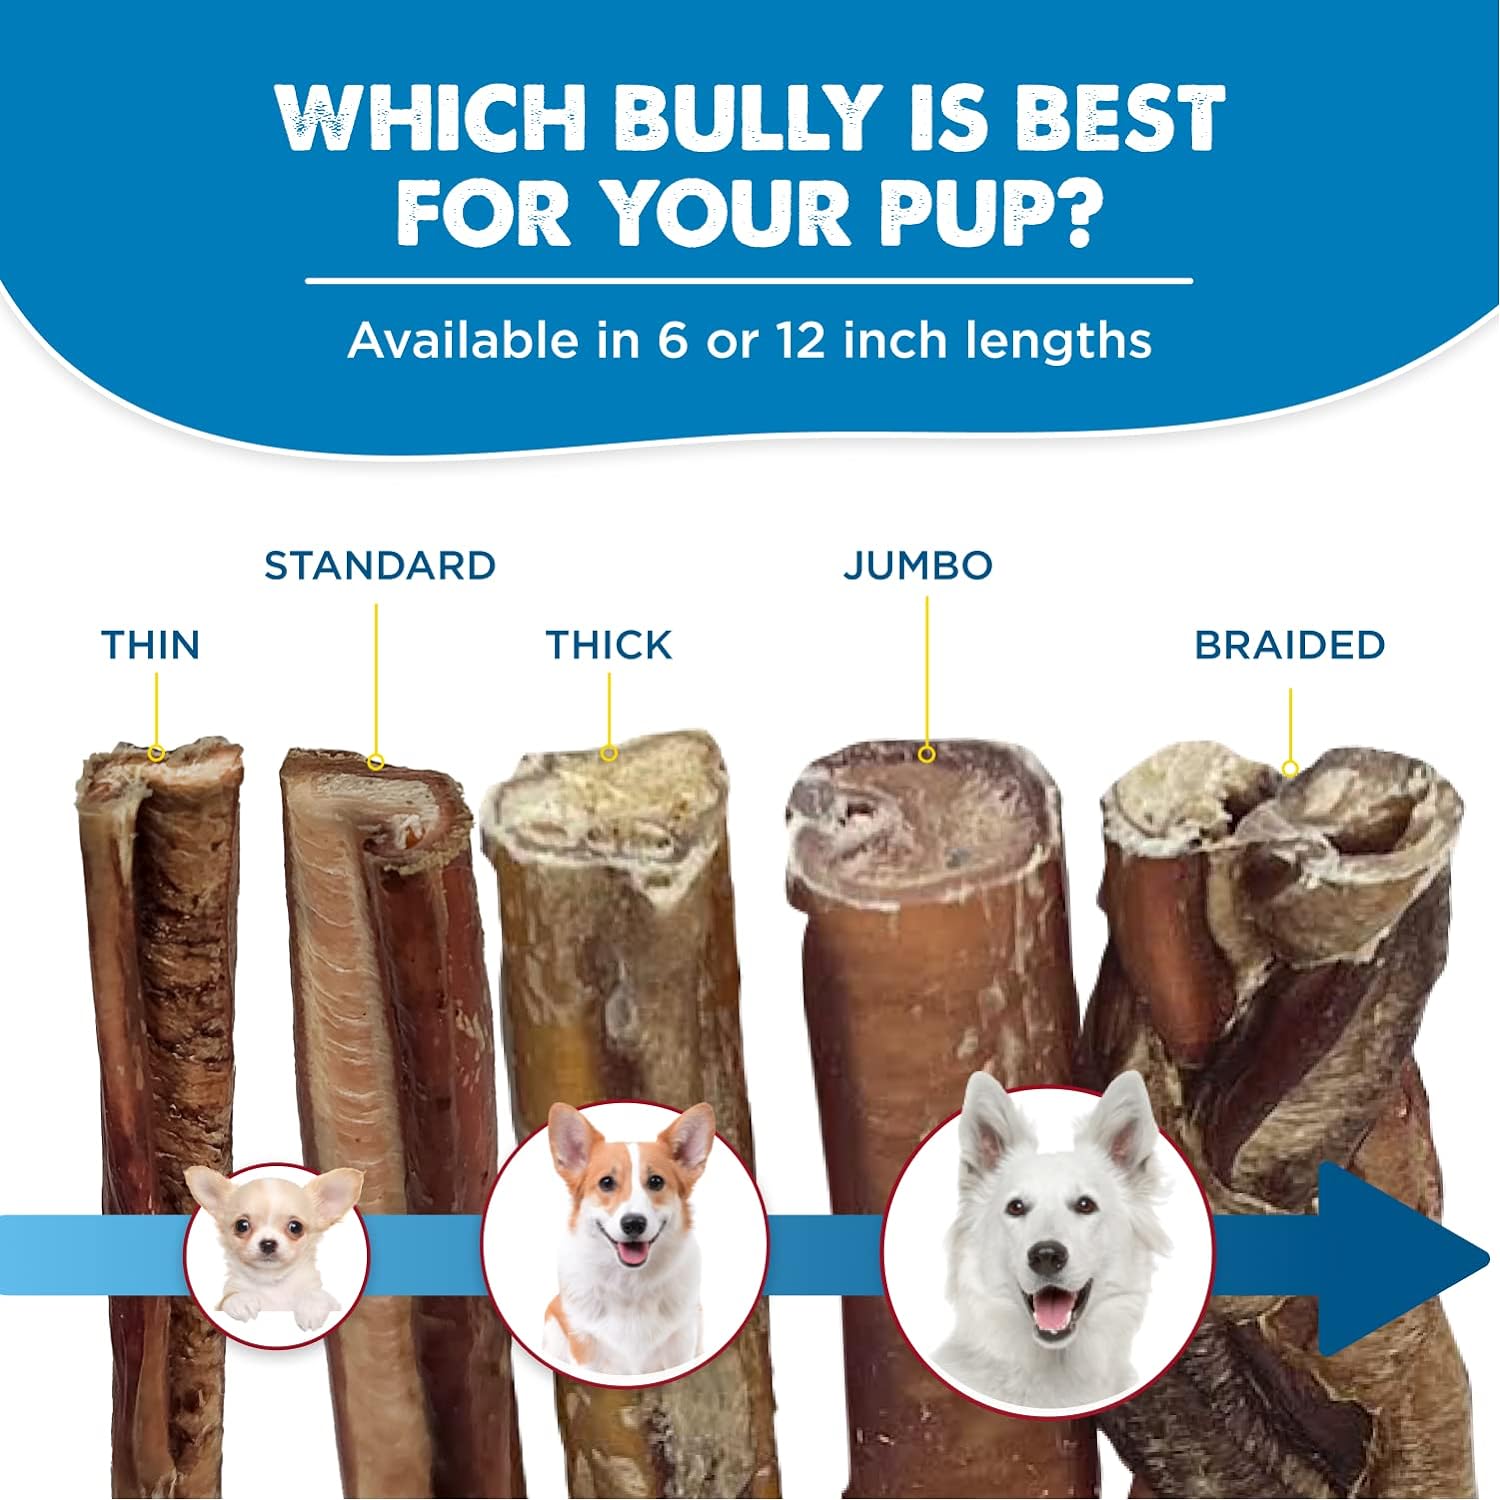 Best Bully Sticks All-Natural Premium 6 Inch Jumbo Bully Sticks for Large Dogs - USA Baked & Packed - 100% Grass-Fed Beef - Single Ingredient Grain & Rawhide Free Dog Chews - 4 Pack : Pet Supplies